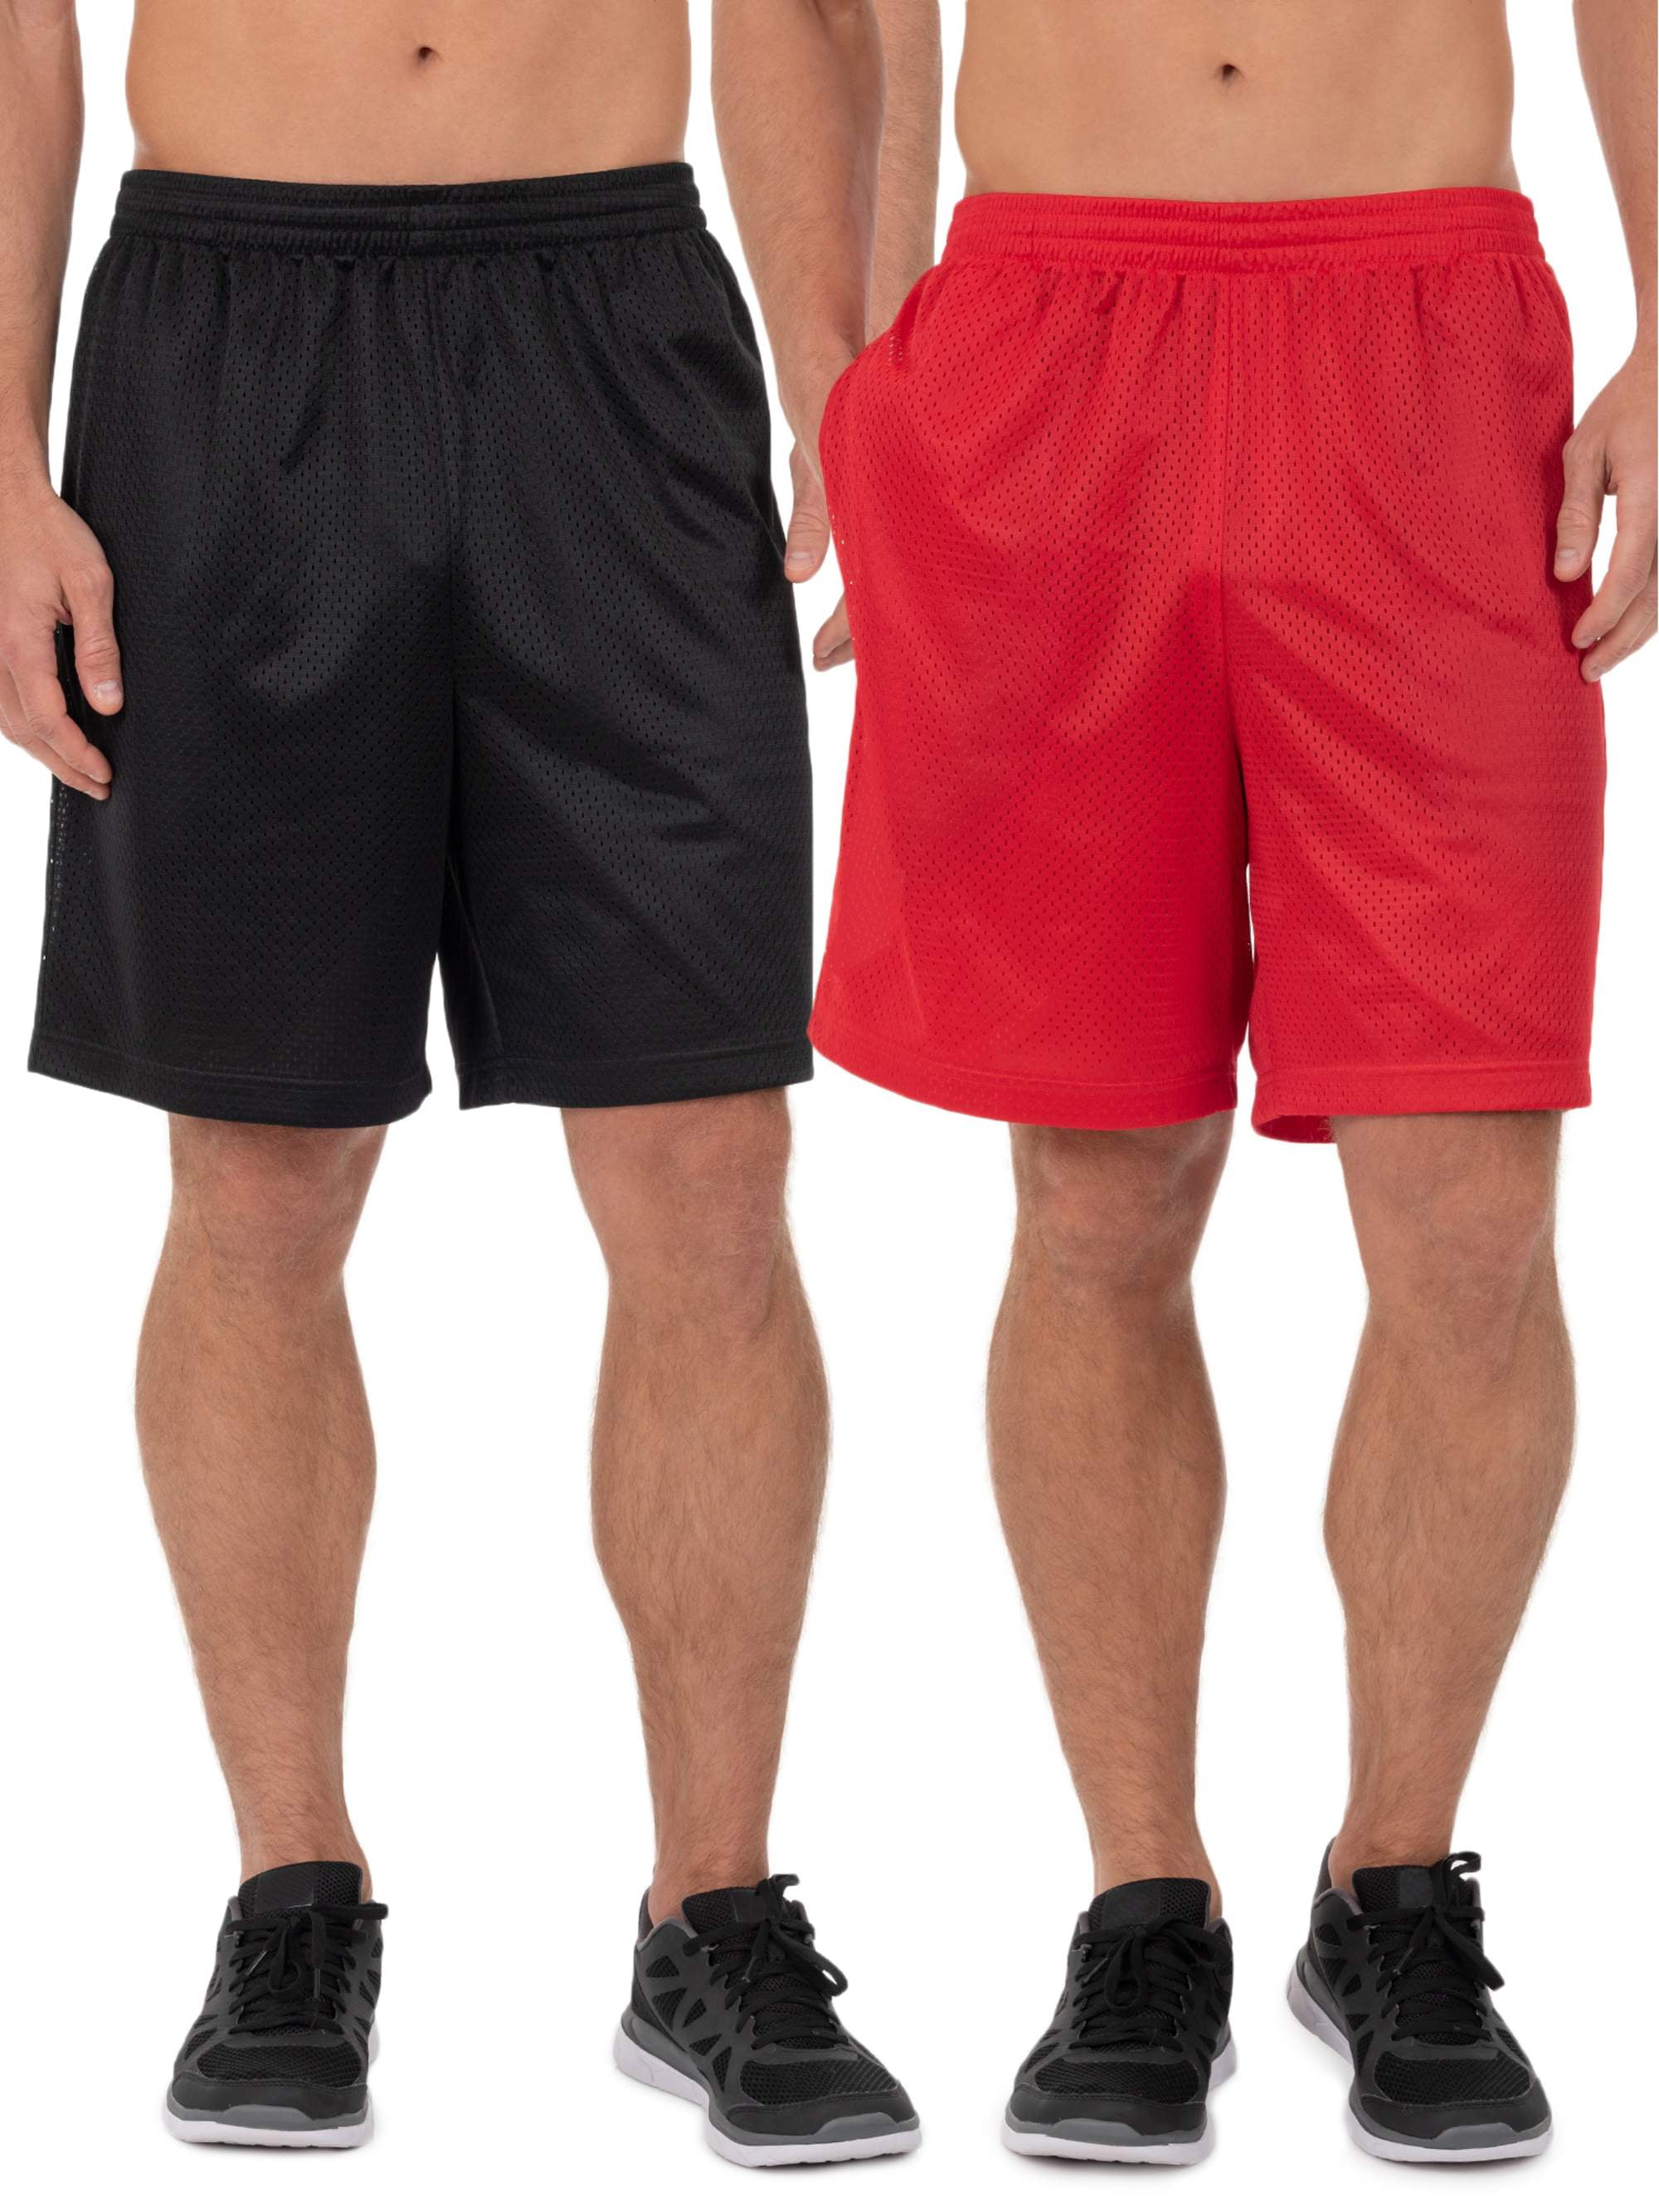 Athletic Works Men's 8" Active Ricehole Mesh Shorts, 2 Pack